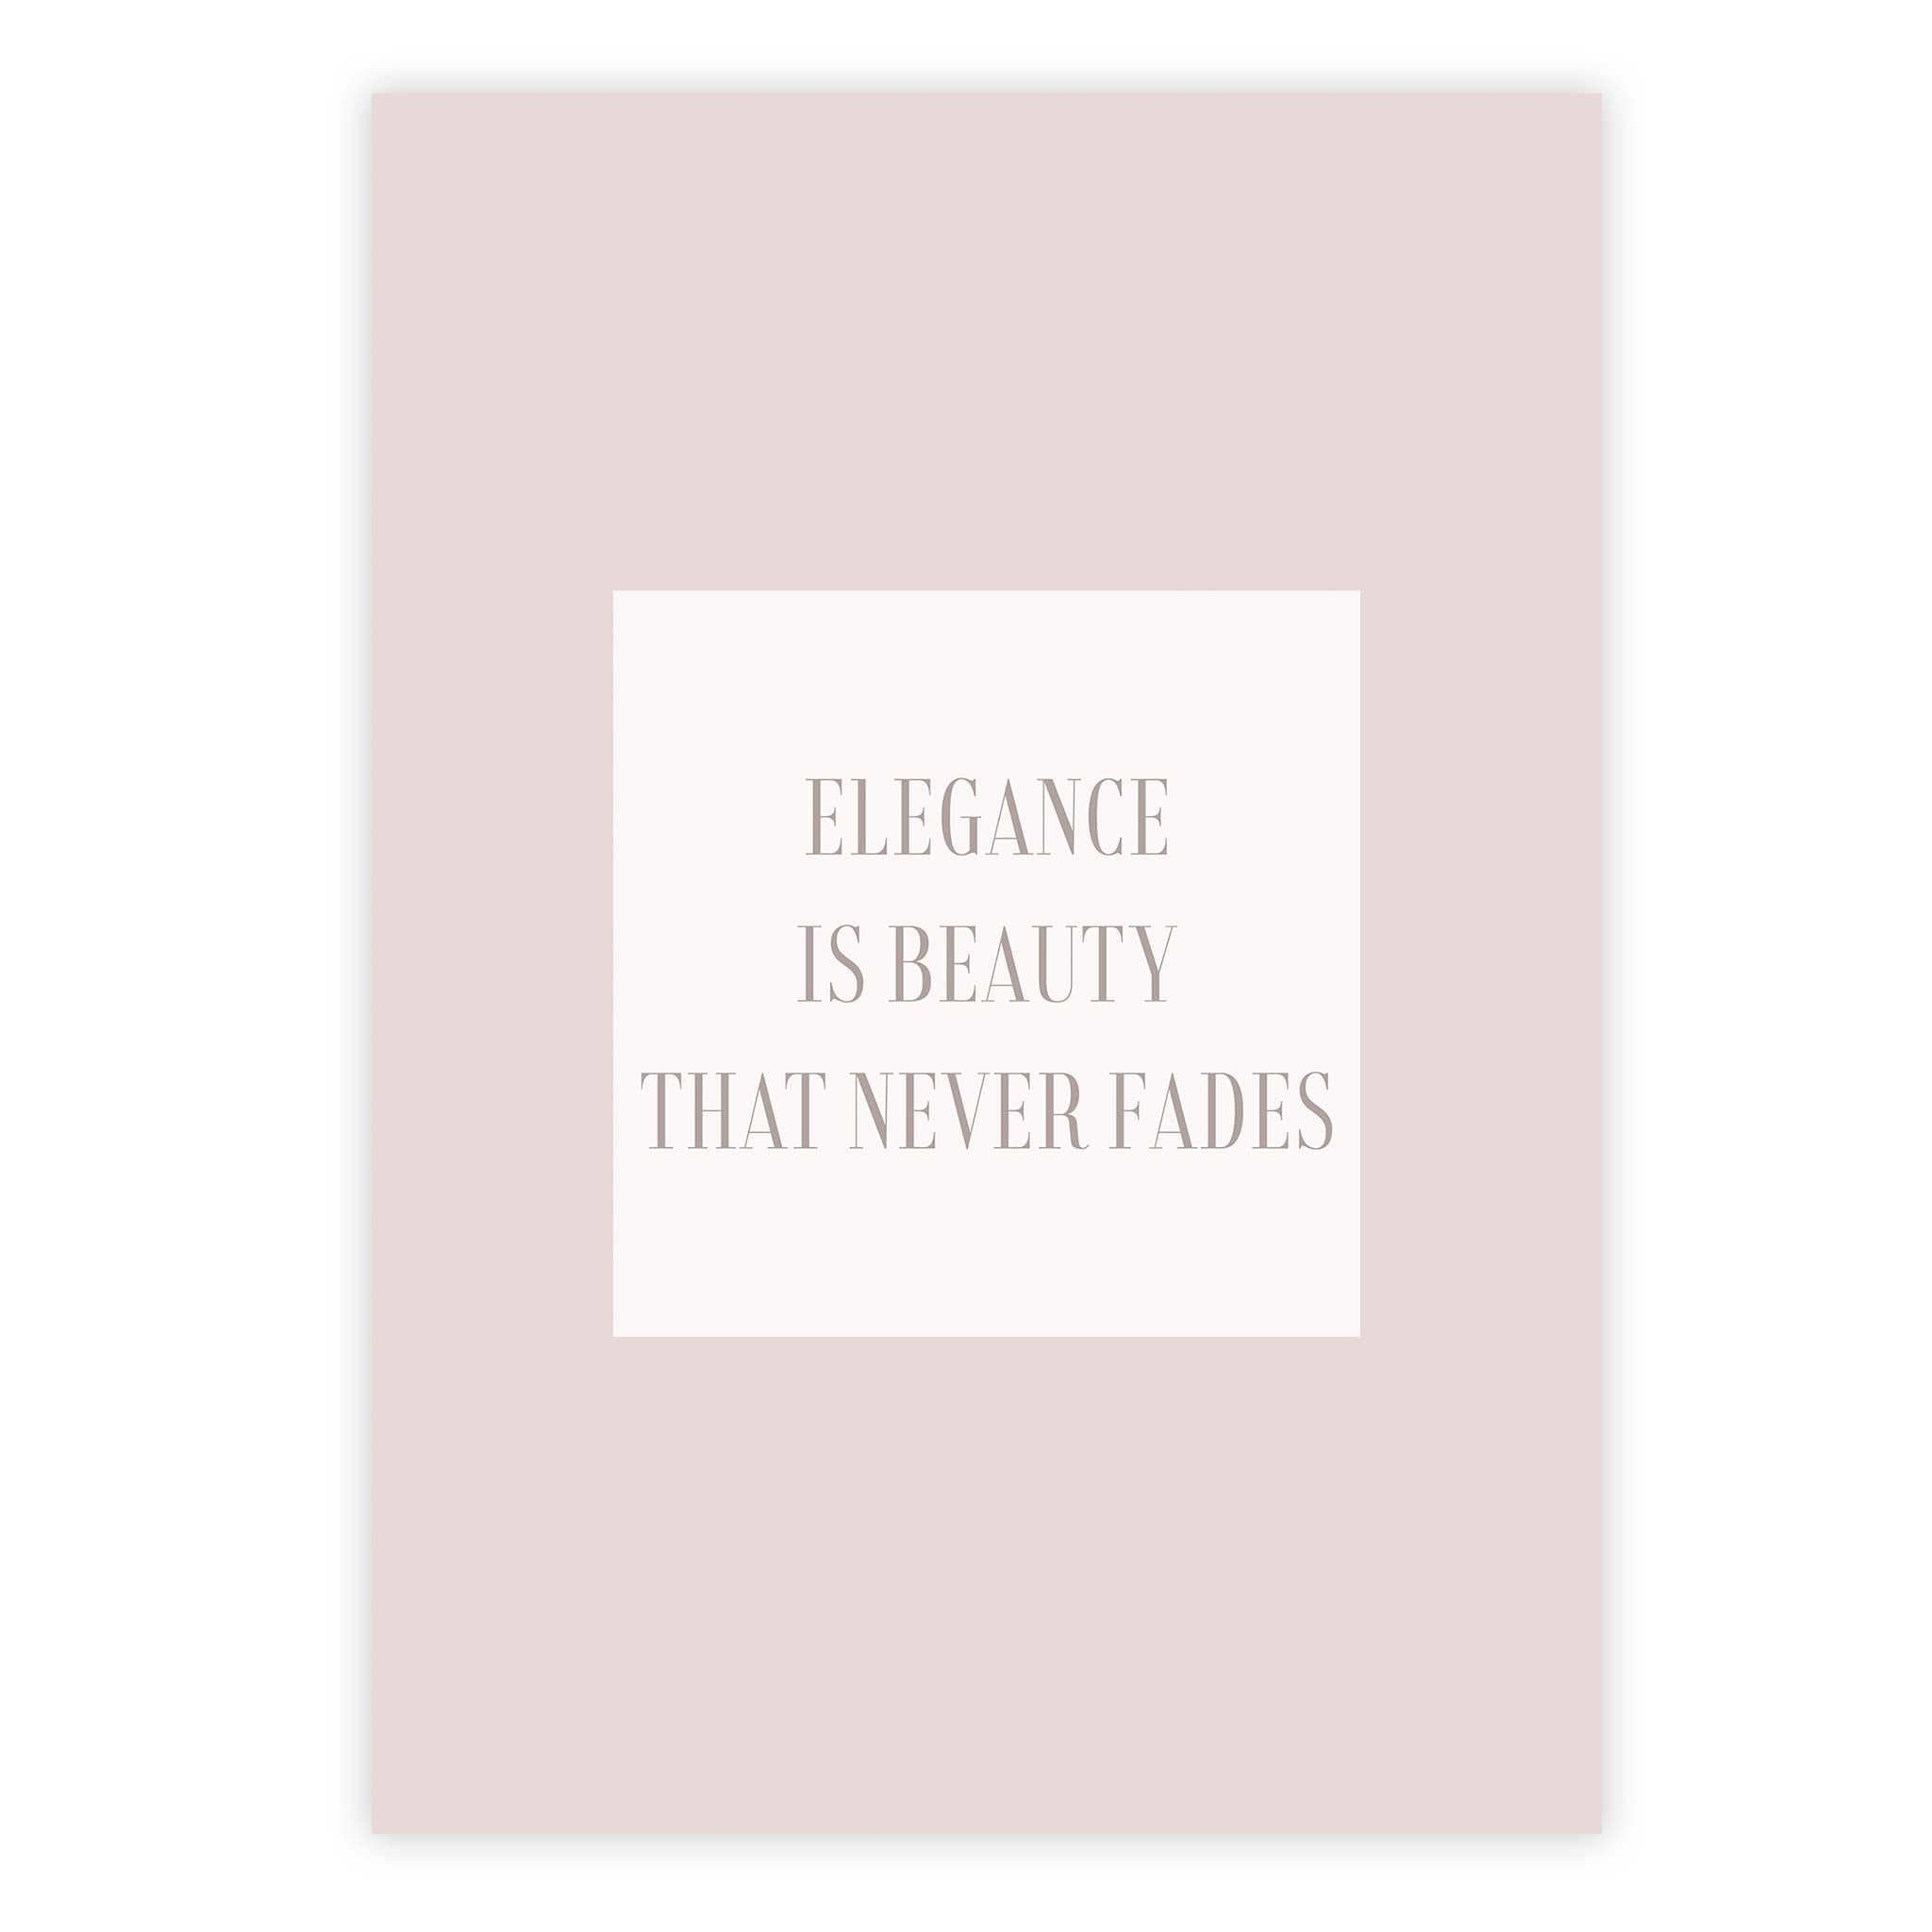 Elegance is beauty that never fades